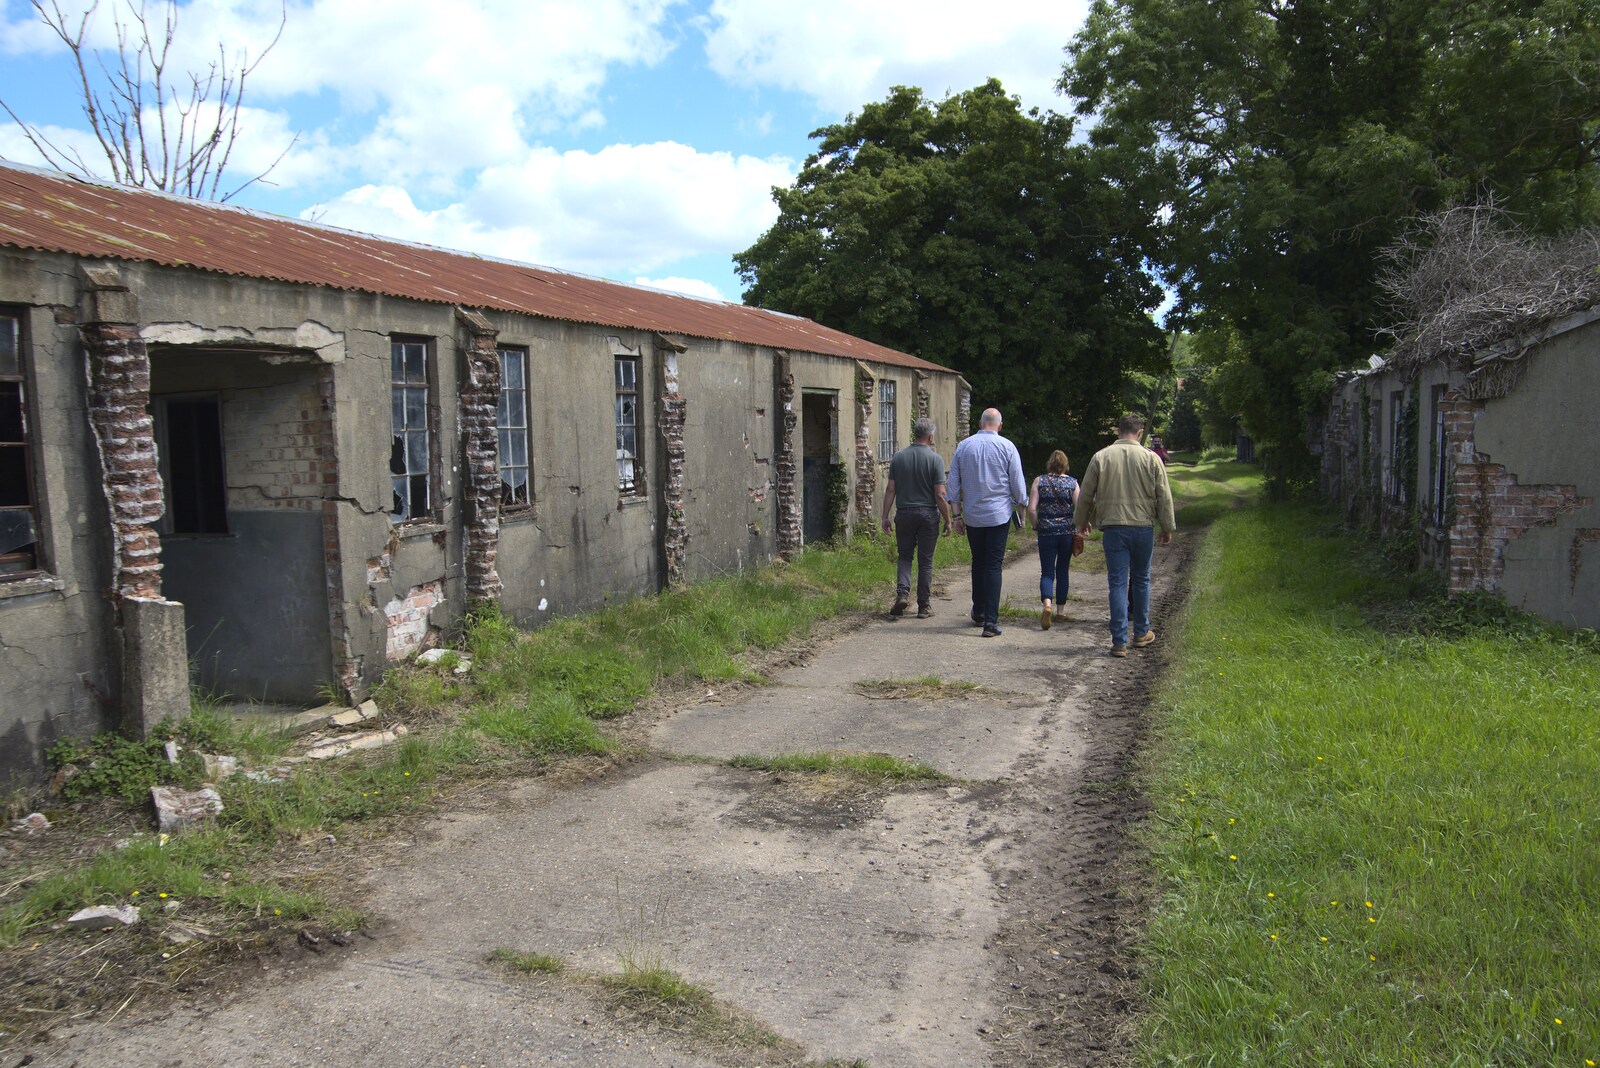 Exploring over, we head back to the house from A 1940s Timewarp, Site 4, Bungay Airfield, Flixton, Suffolk - 9th June 2022